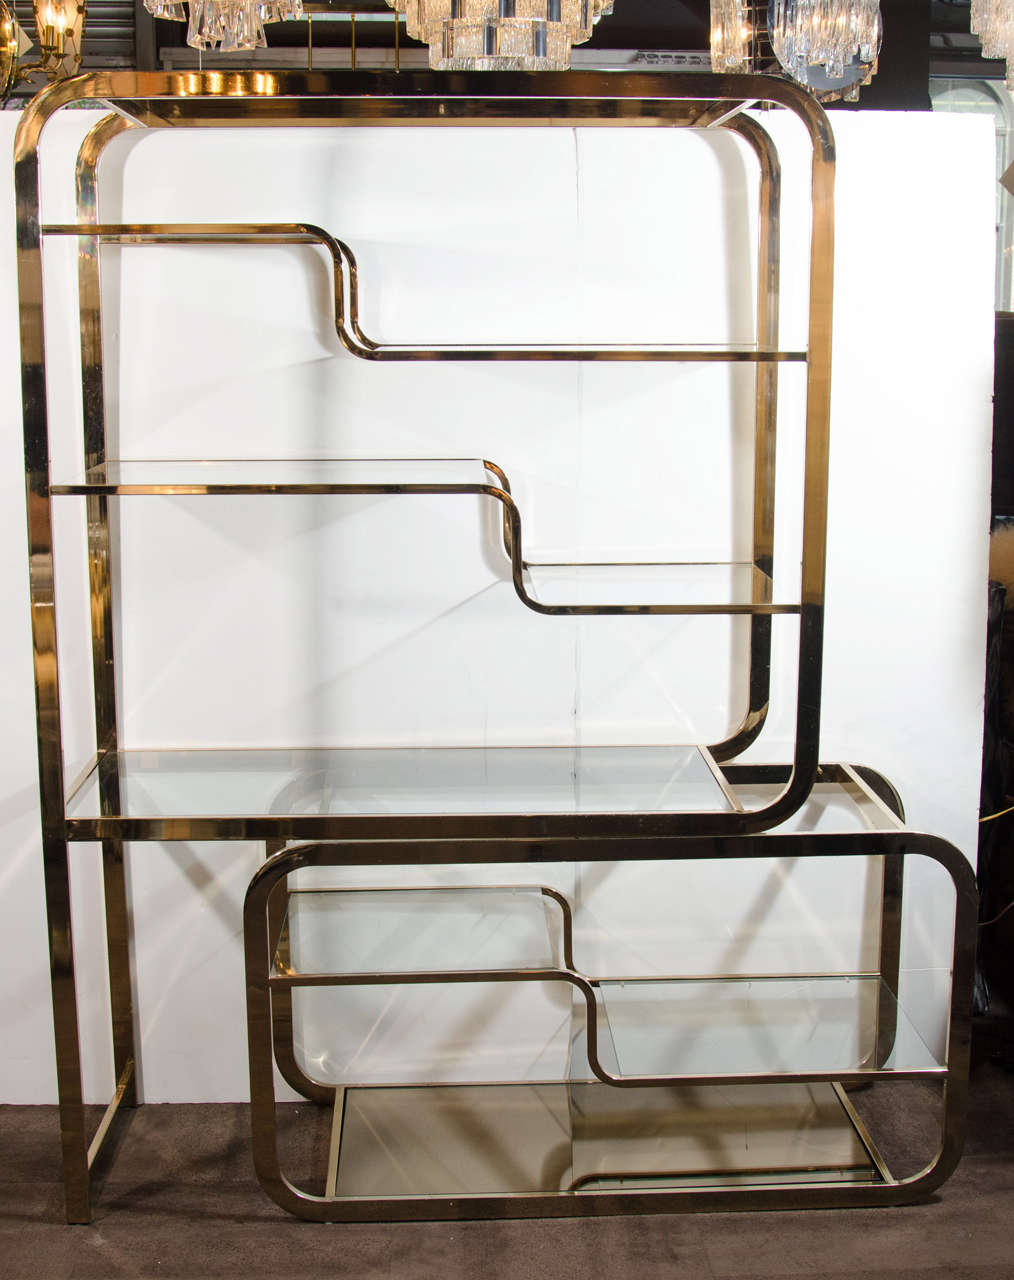 Modular design with extendable tier and bronze mirrored and glass shelves.
Width extends from 48.5